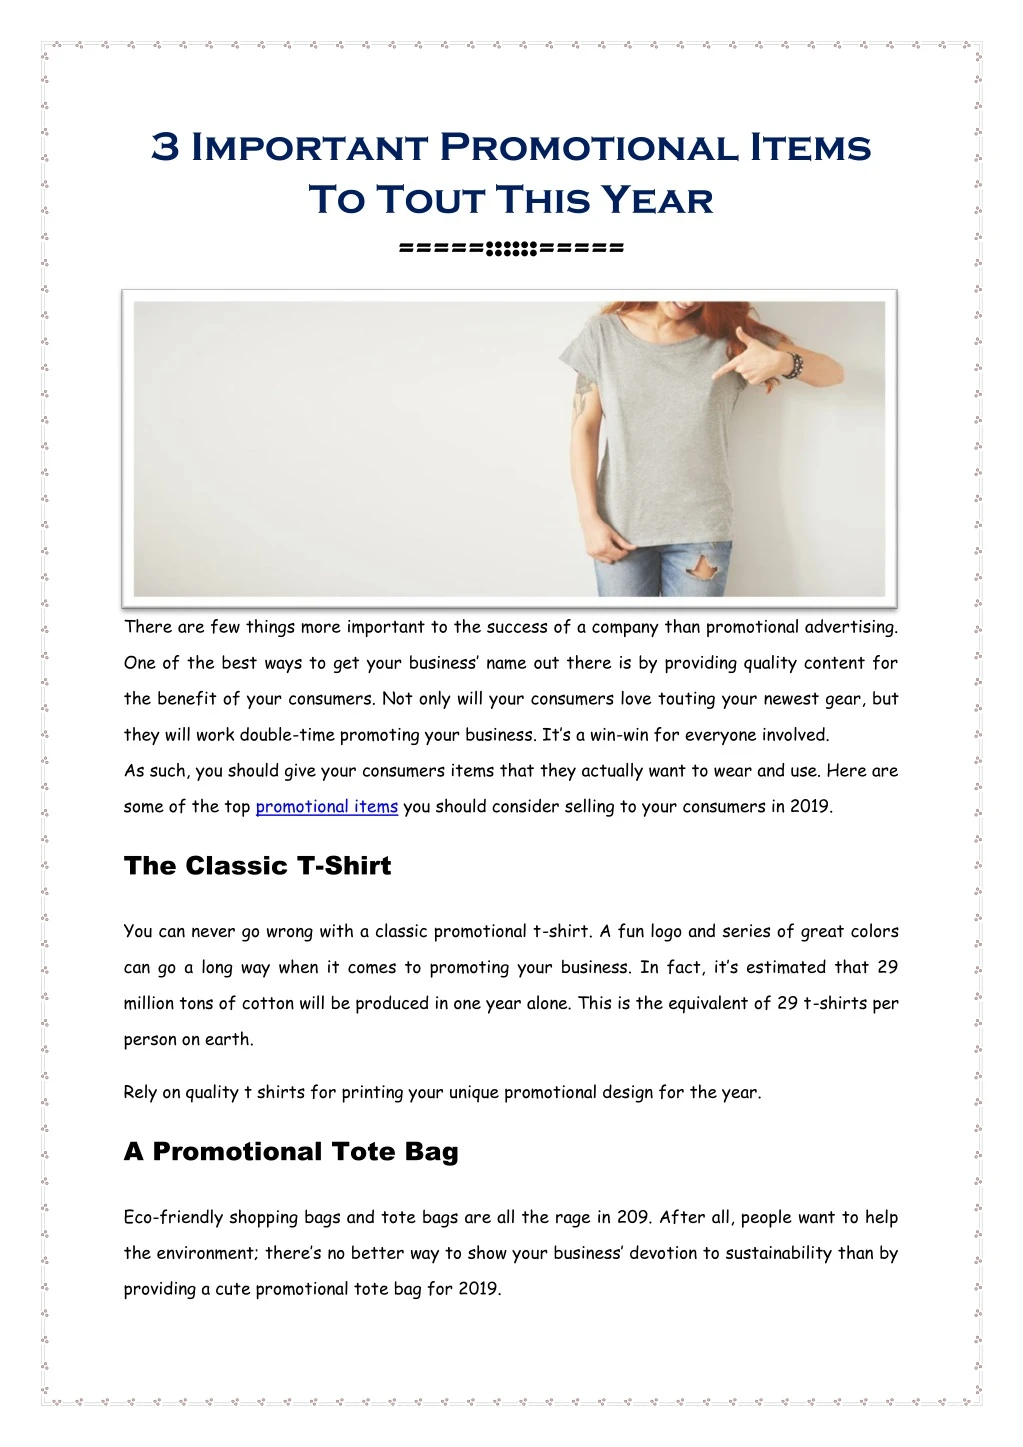 3 important promotional items to tout this year